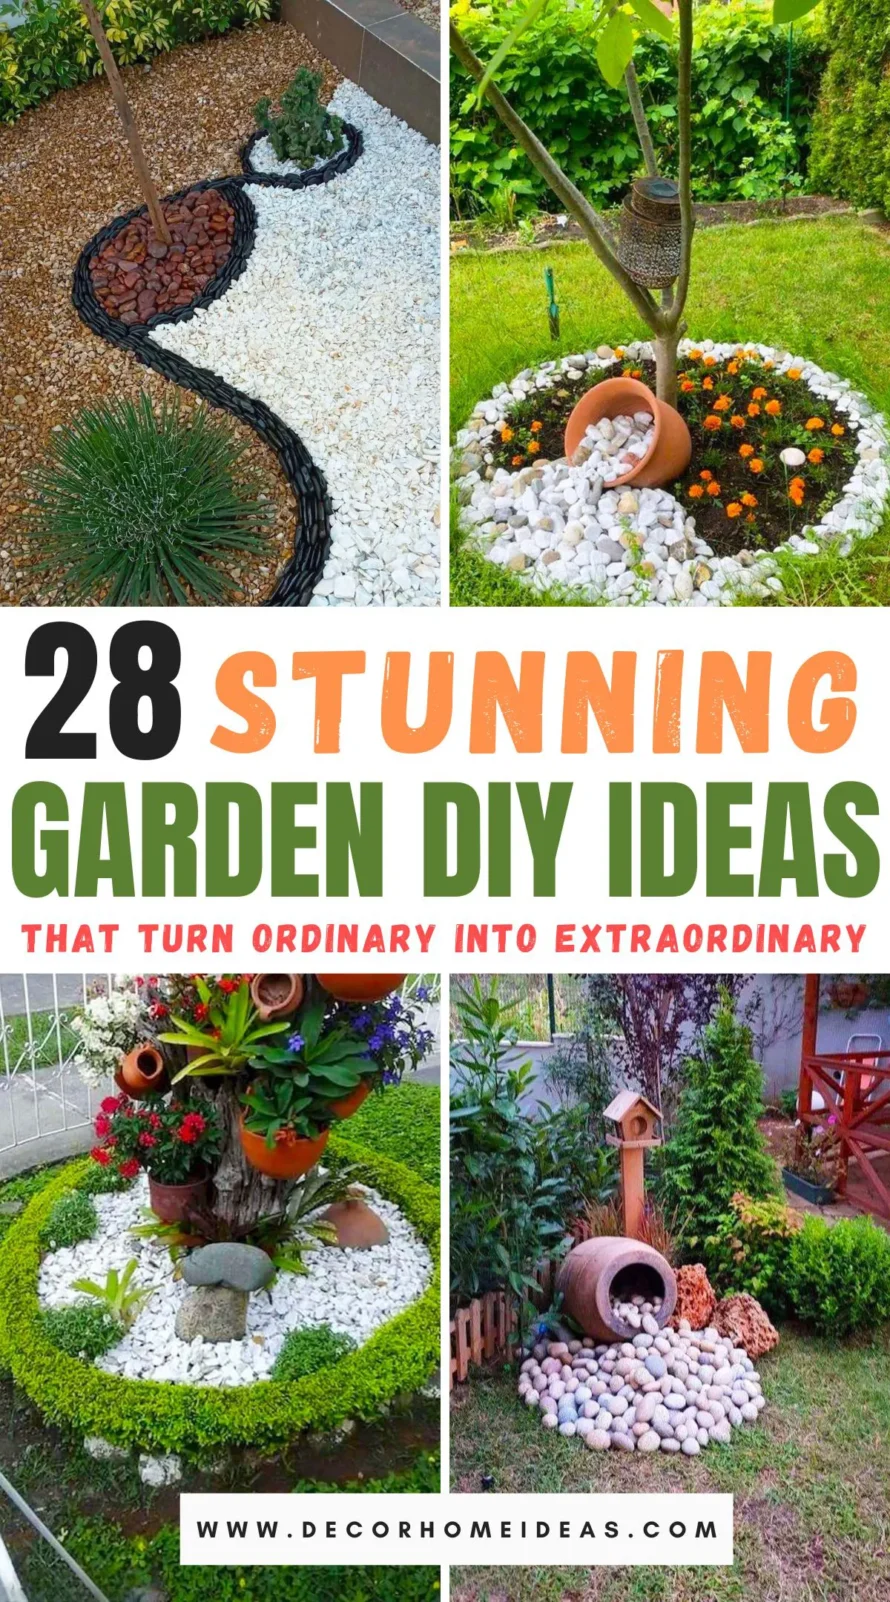 Explore 28 stunning garden ideas that elevate ordinary outdoor spaces to extraordinary retreats. From innovative planting techniques to breathtaking design layouts, learn how to infuse your garden with creativity and flair. Get ready to be inspired!